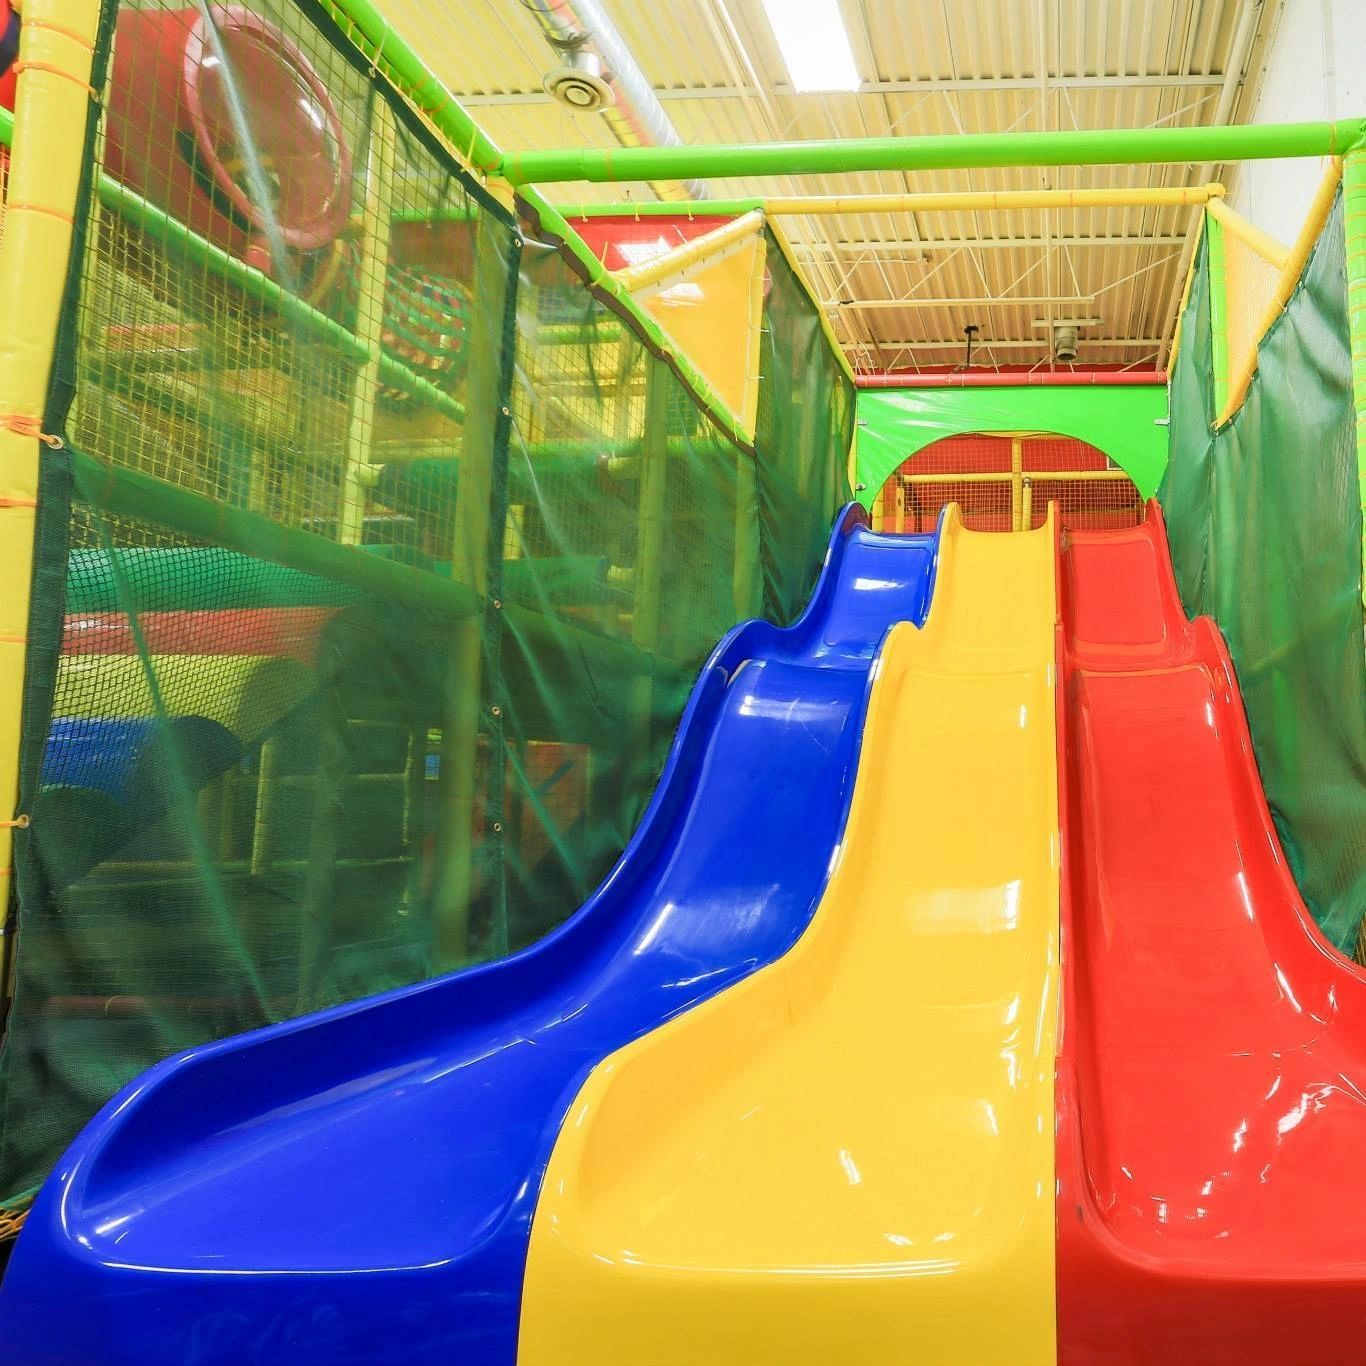 The best part about - Bounce Family Entertainment Center